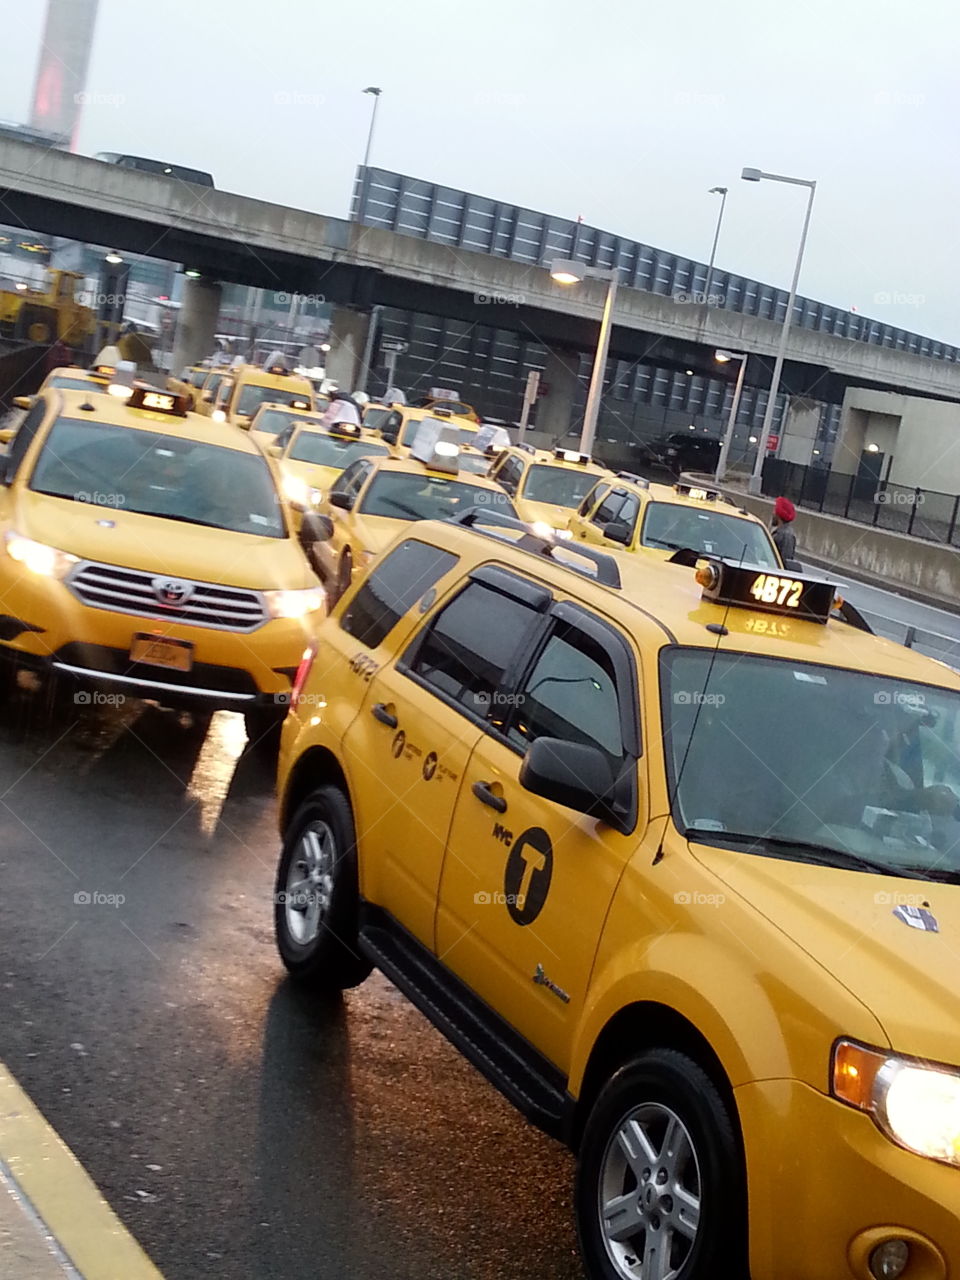 New Yorks Main Transportation. Taxi's ready to serve, never a problem in New York